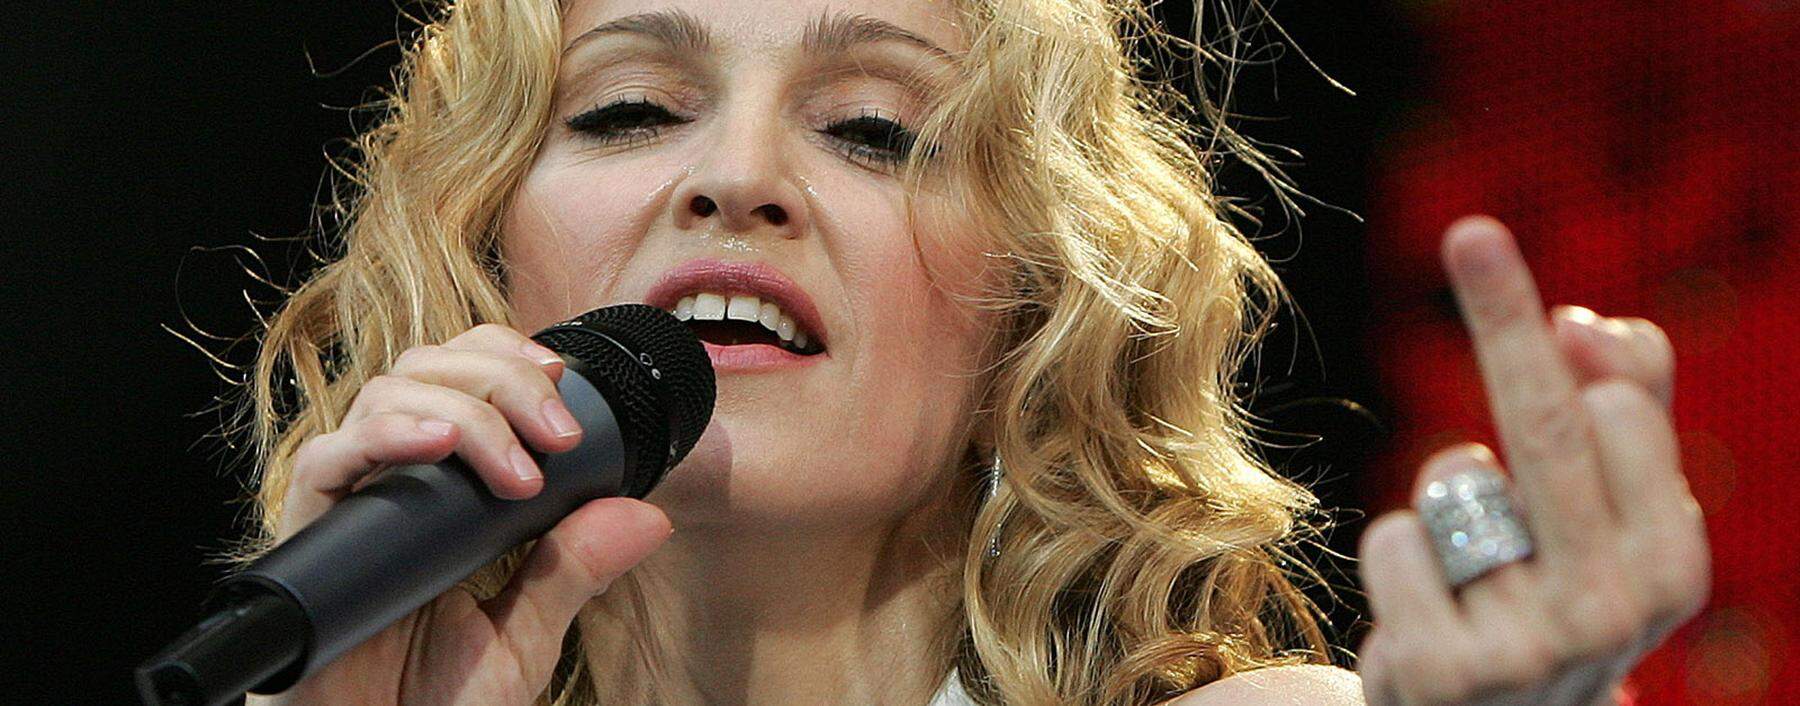 U.S. pop star Madonna performs at the Live 8 concert in Hyde Park in London.